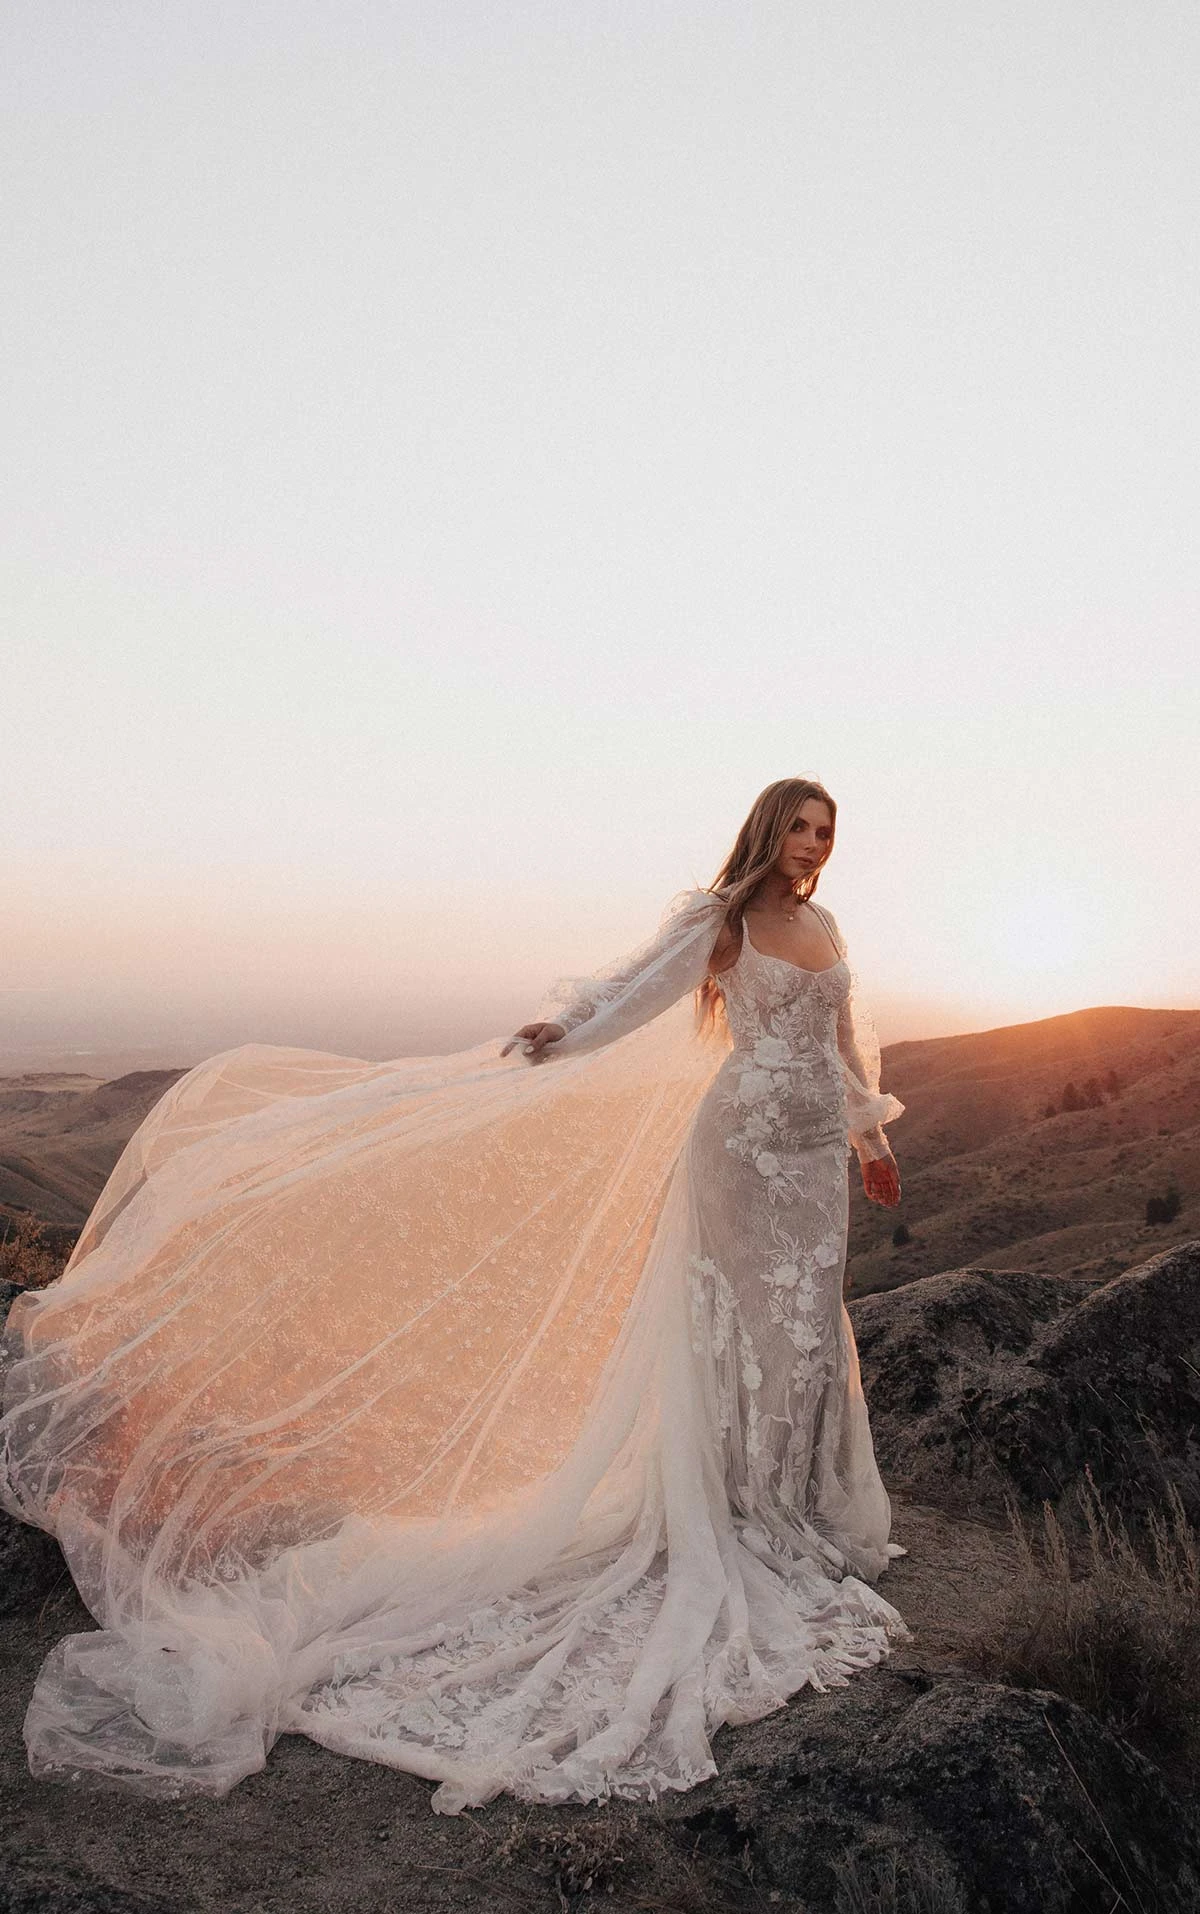 couture wedding dress with detachable cape - LE1226 by Martina Liana Luxe